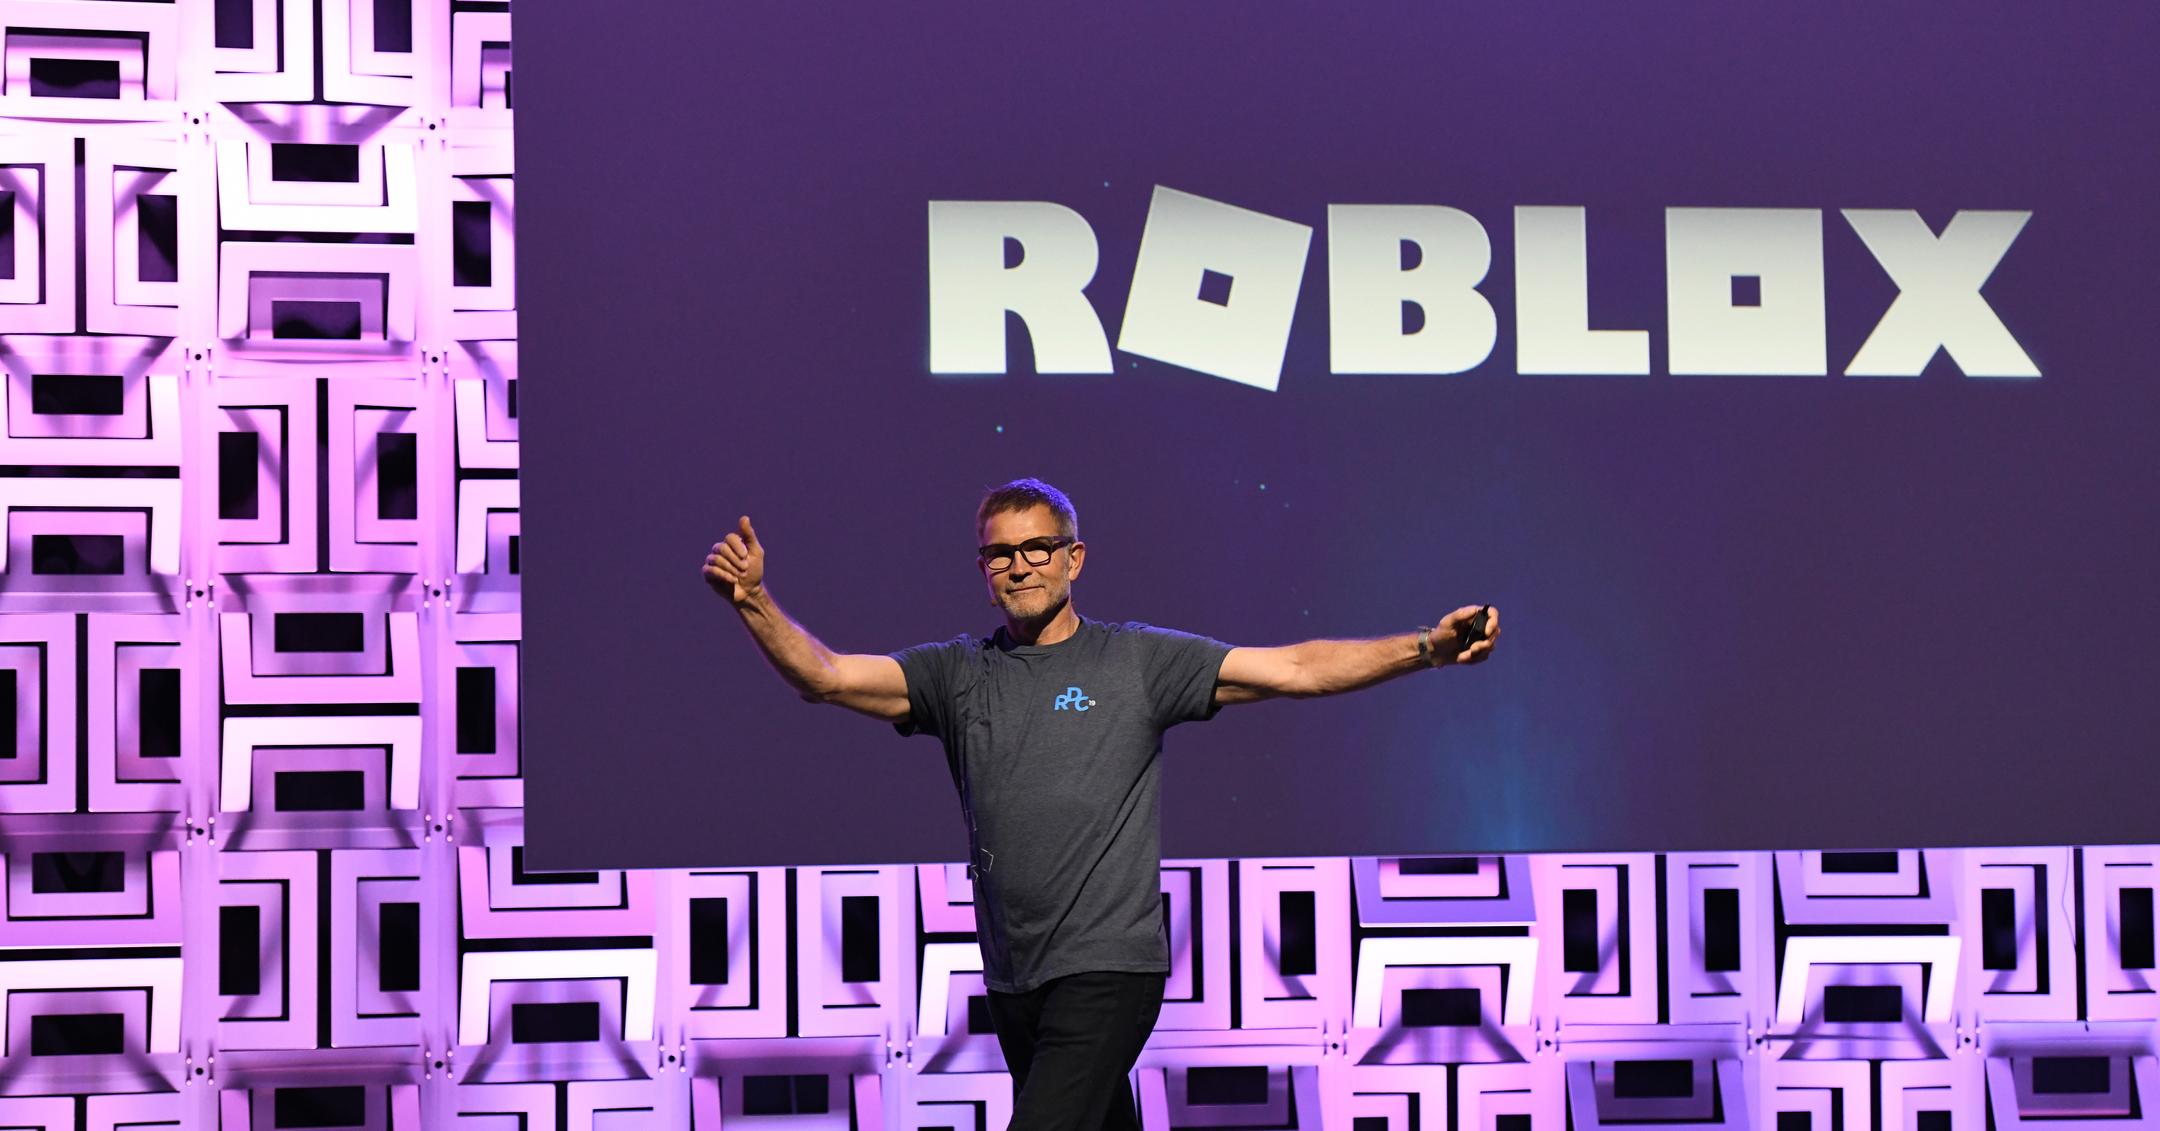 When Is The Roblox Ipo Date - is roblox publicly traded